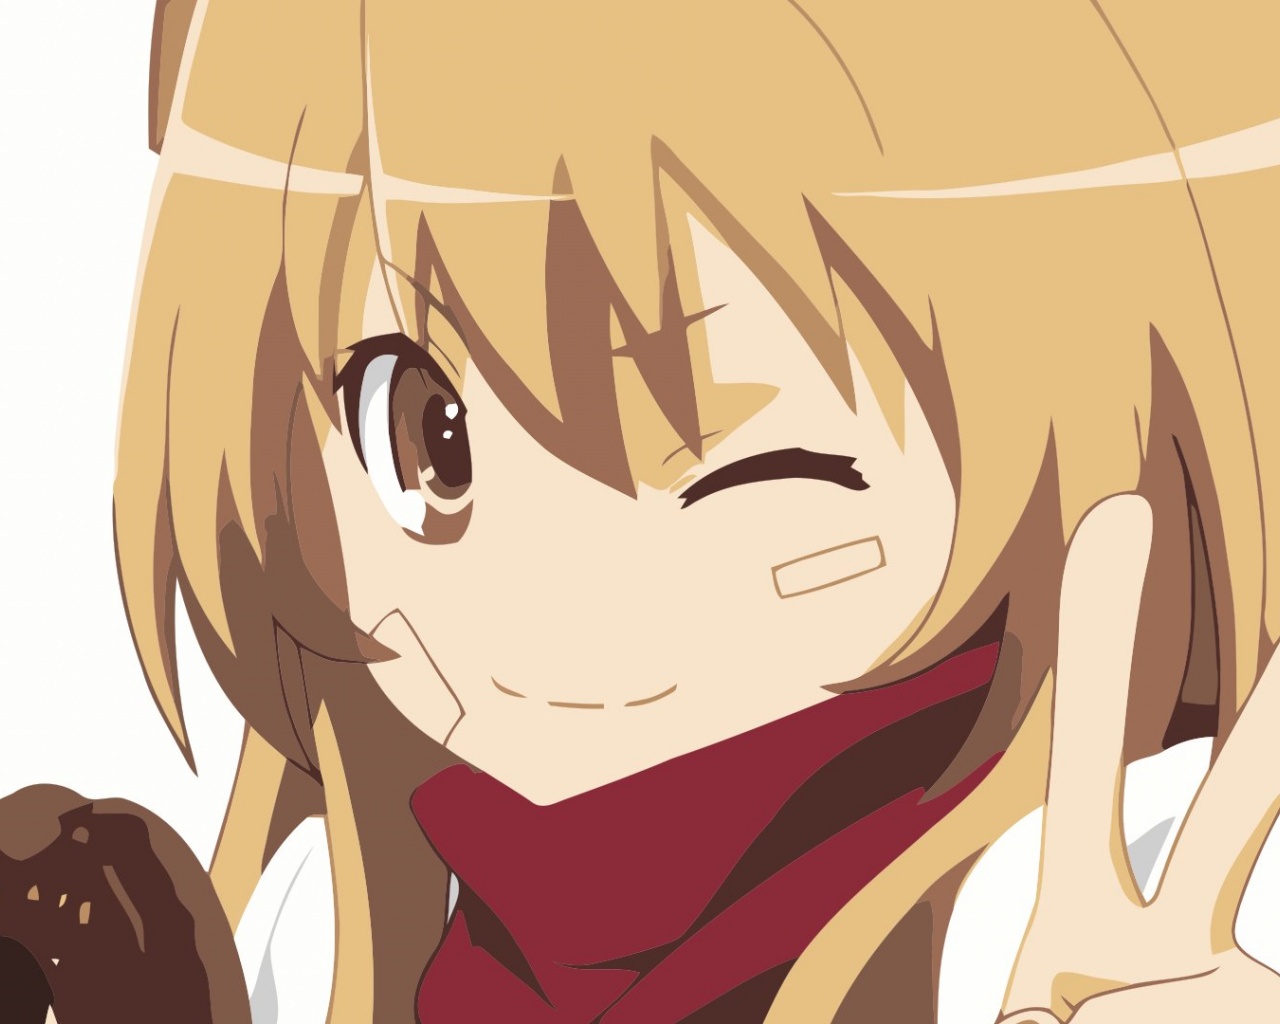 Free Anime Post, Aisaka Taiga Making a "V" Pose, She is Happy in Smile--1280X1024 free wallpaper download